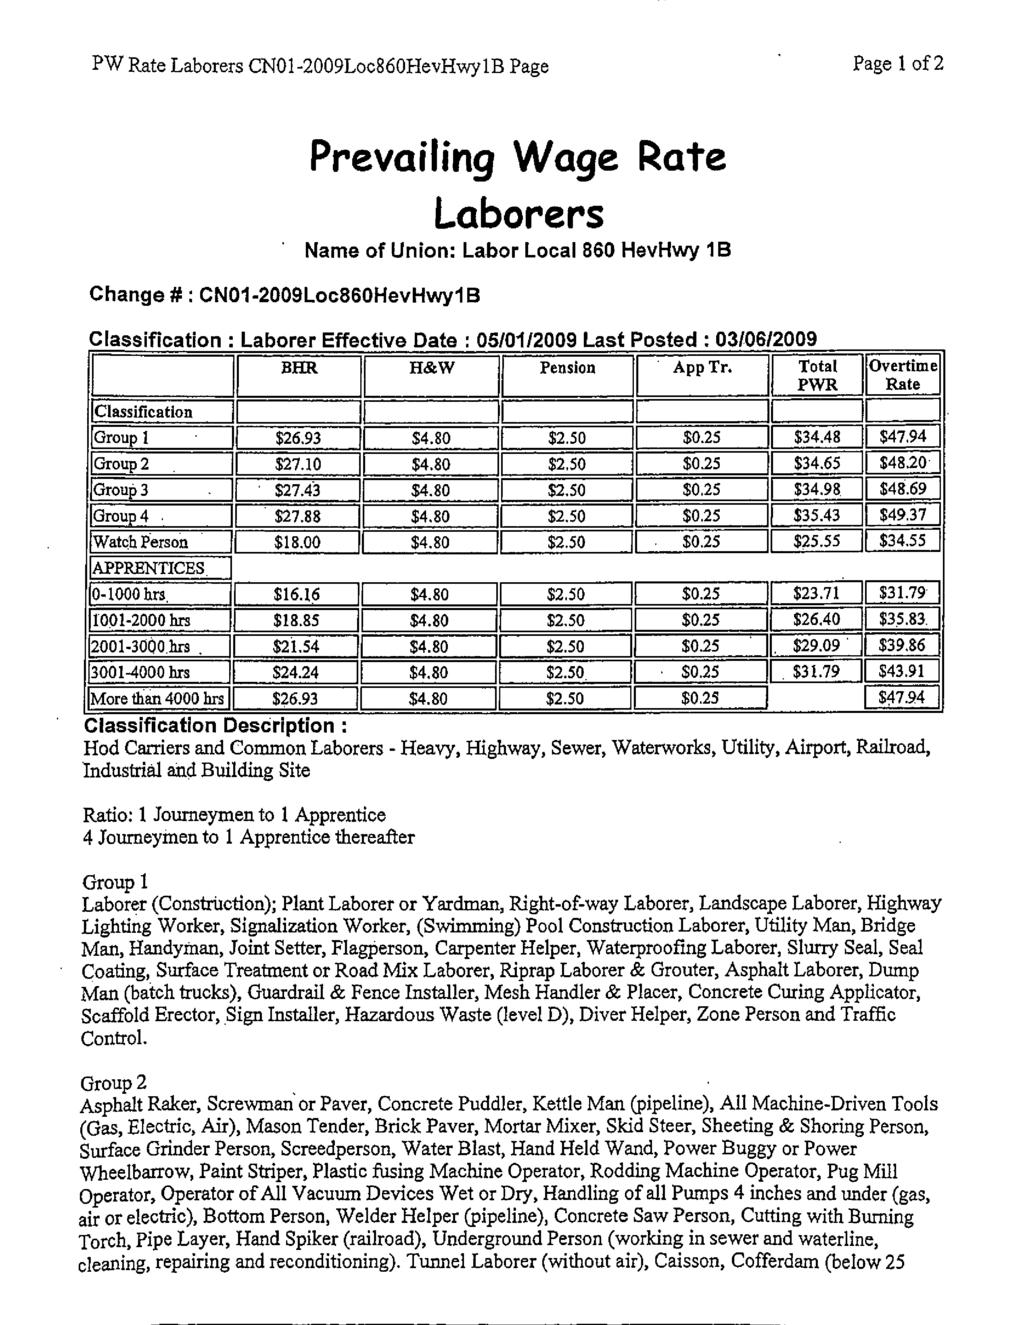 PW Rate Laborers CNO1-2009Loc860HevHwylB Page Page 1 of 2 Change # CNO1-2009Loc860HevHwy1B Prevailing Wage Rate Laborers Name of Union: Labor Local 860 HevHwy I B Classification : Laborer Effective